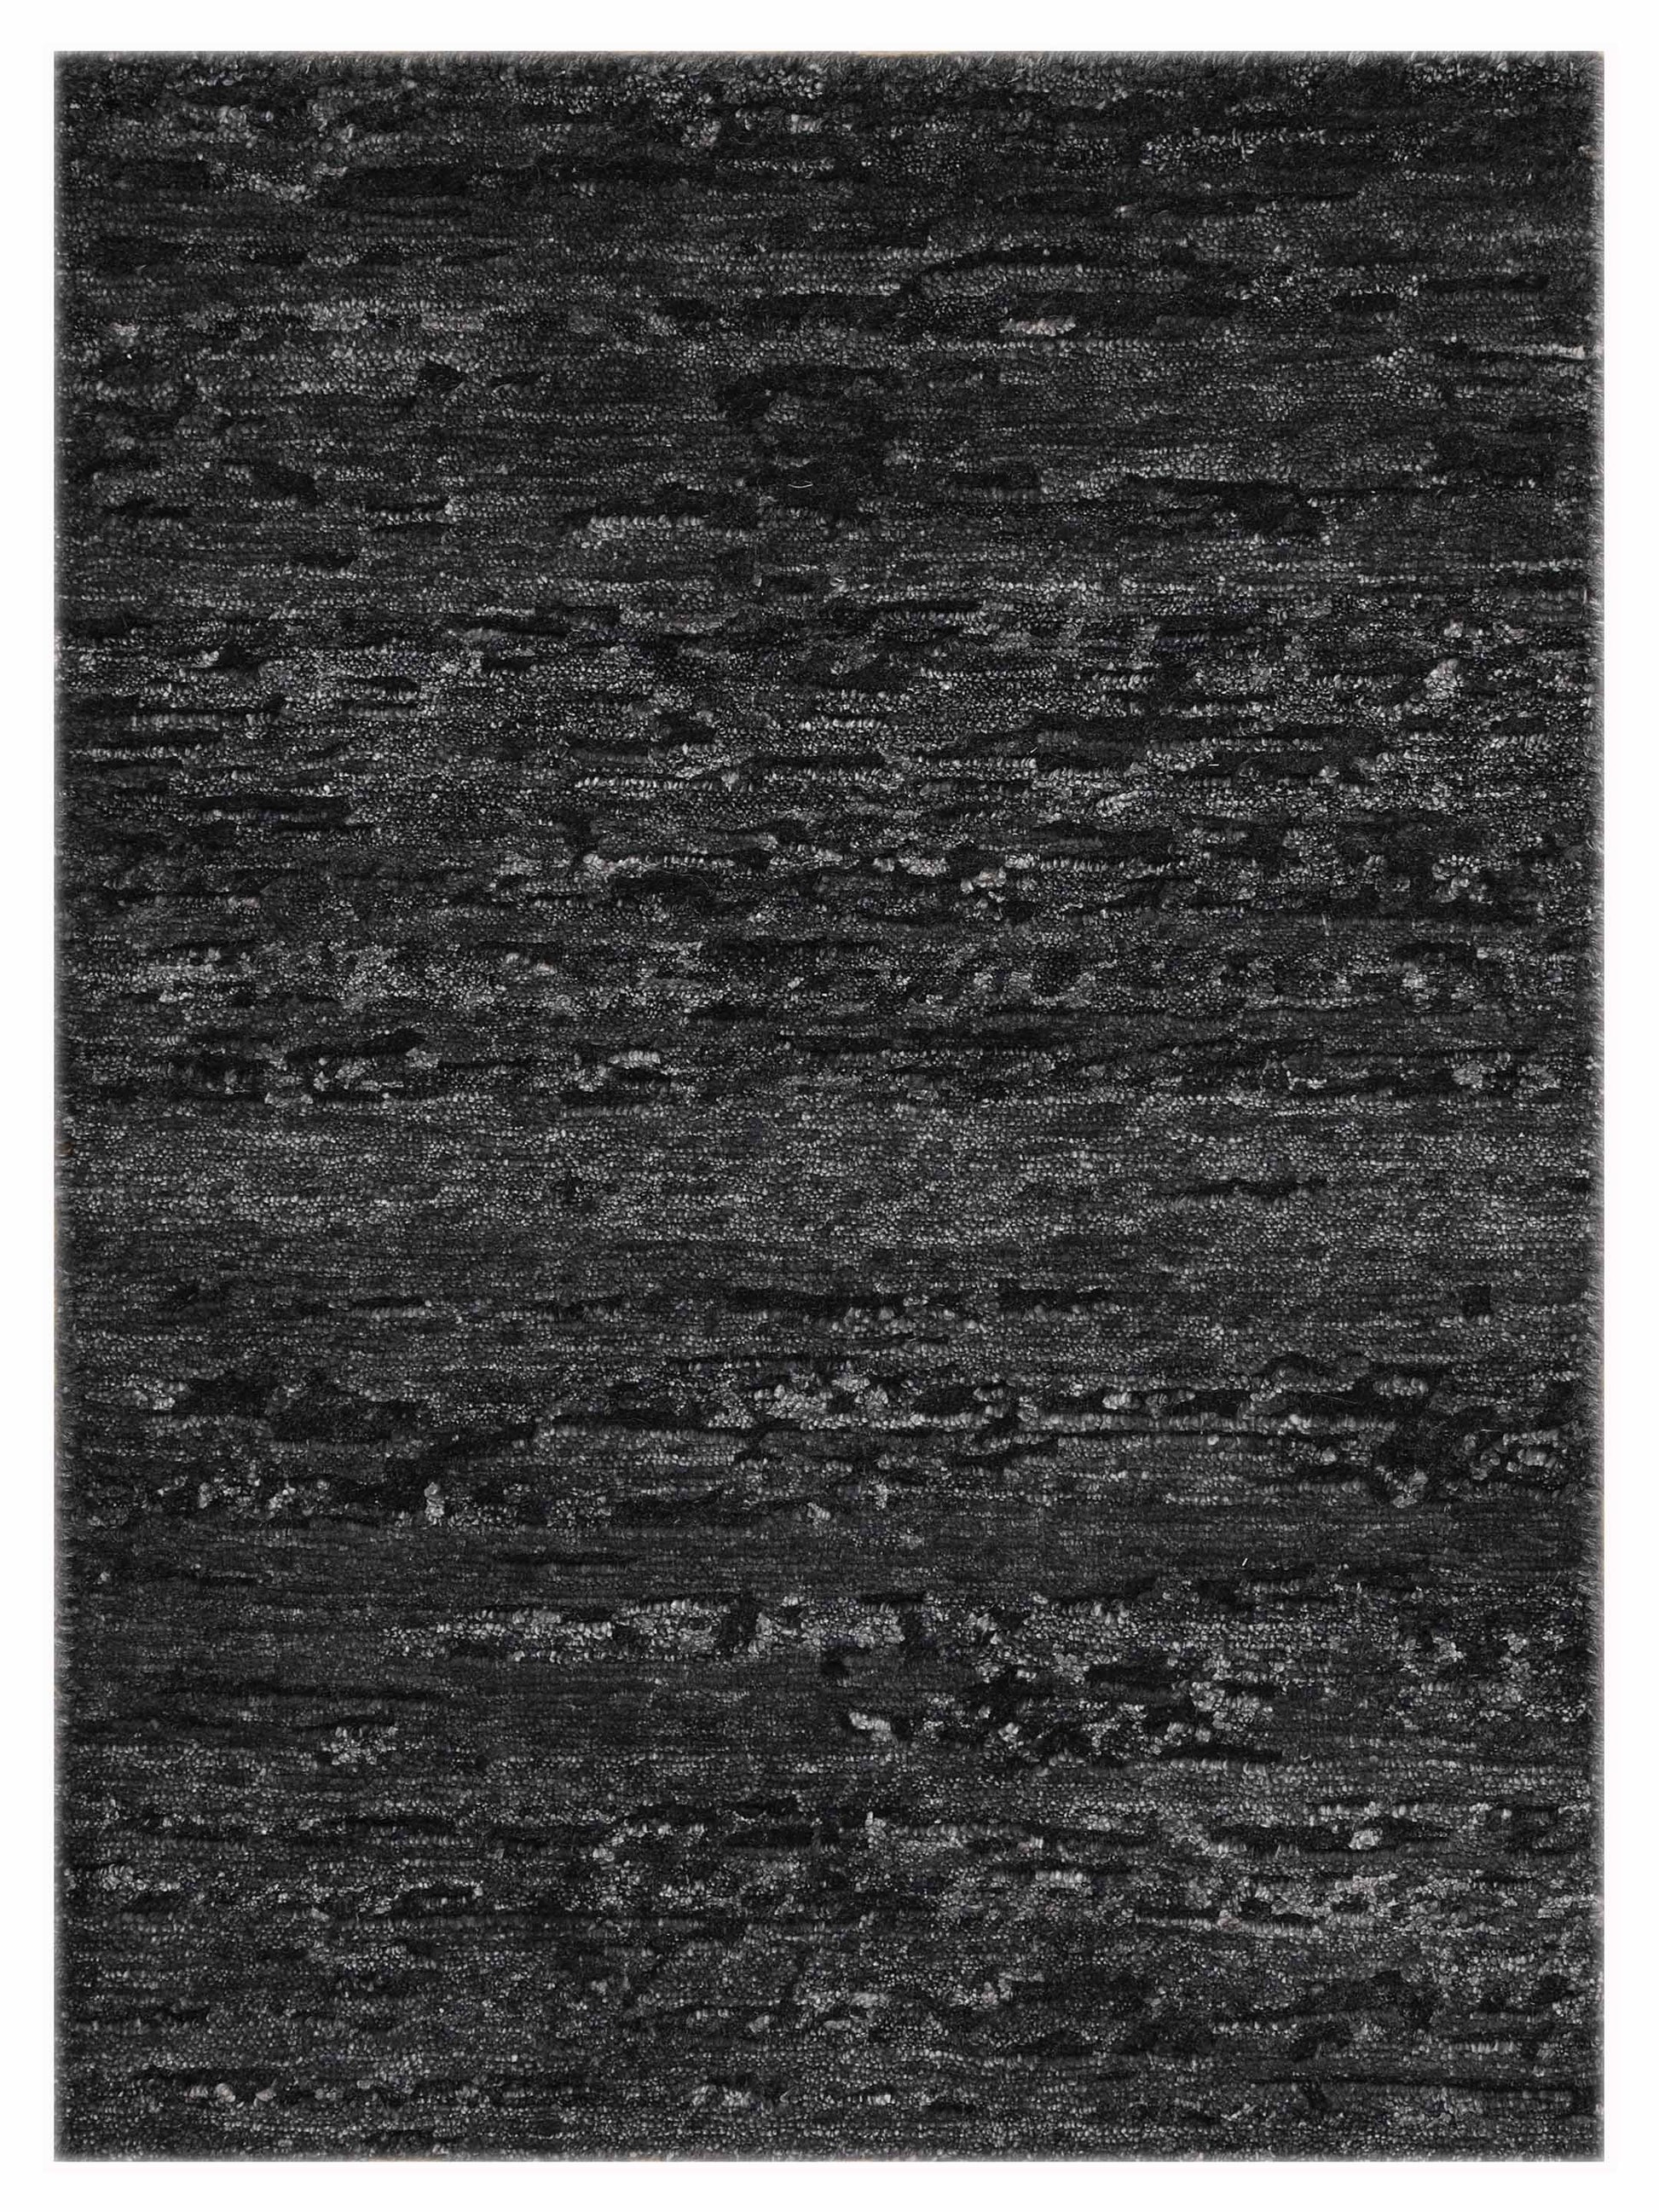 Artisan Mary MN-237 Charcoal Contemporary Knotted Rug